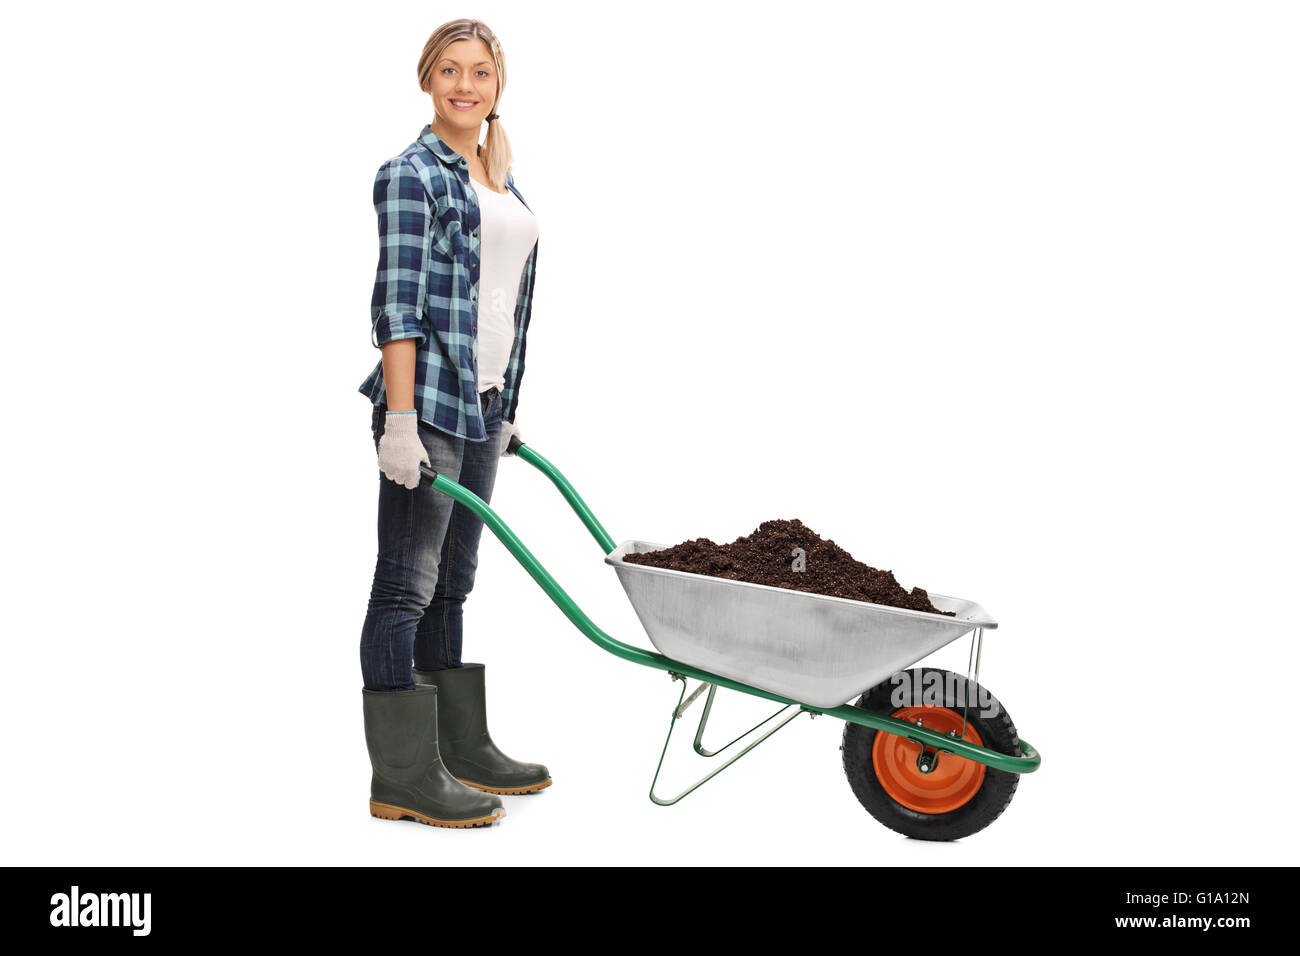 Young woman posing with a wheelbarrow full of dirt isolated on white background Stock Photo